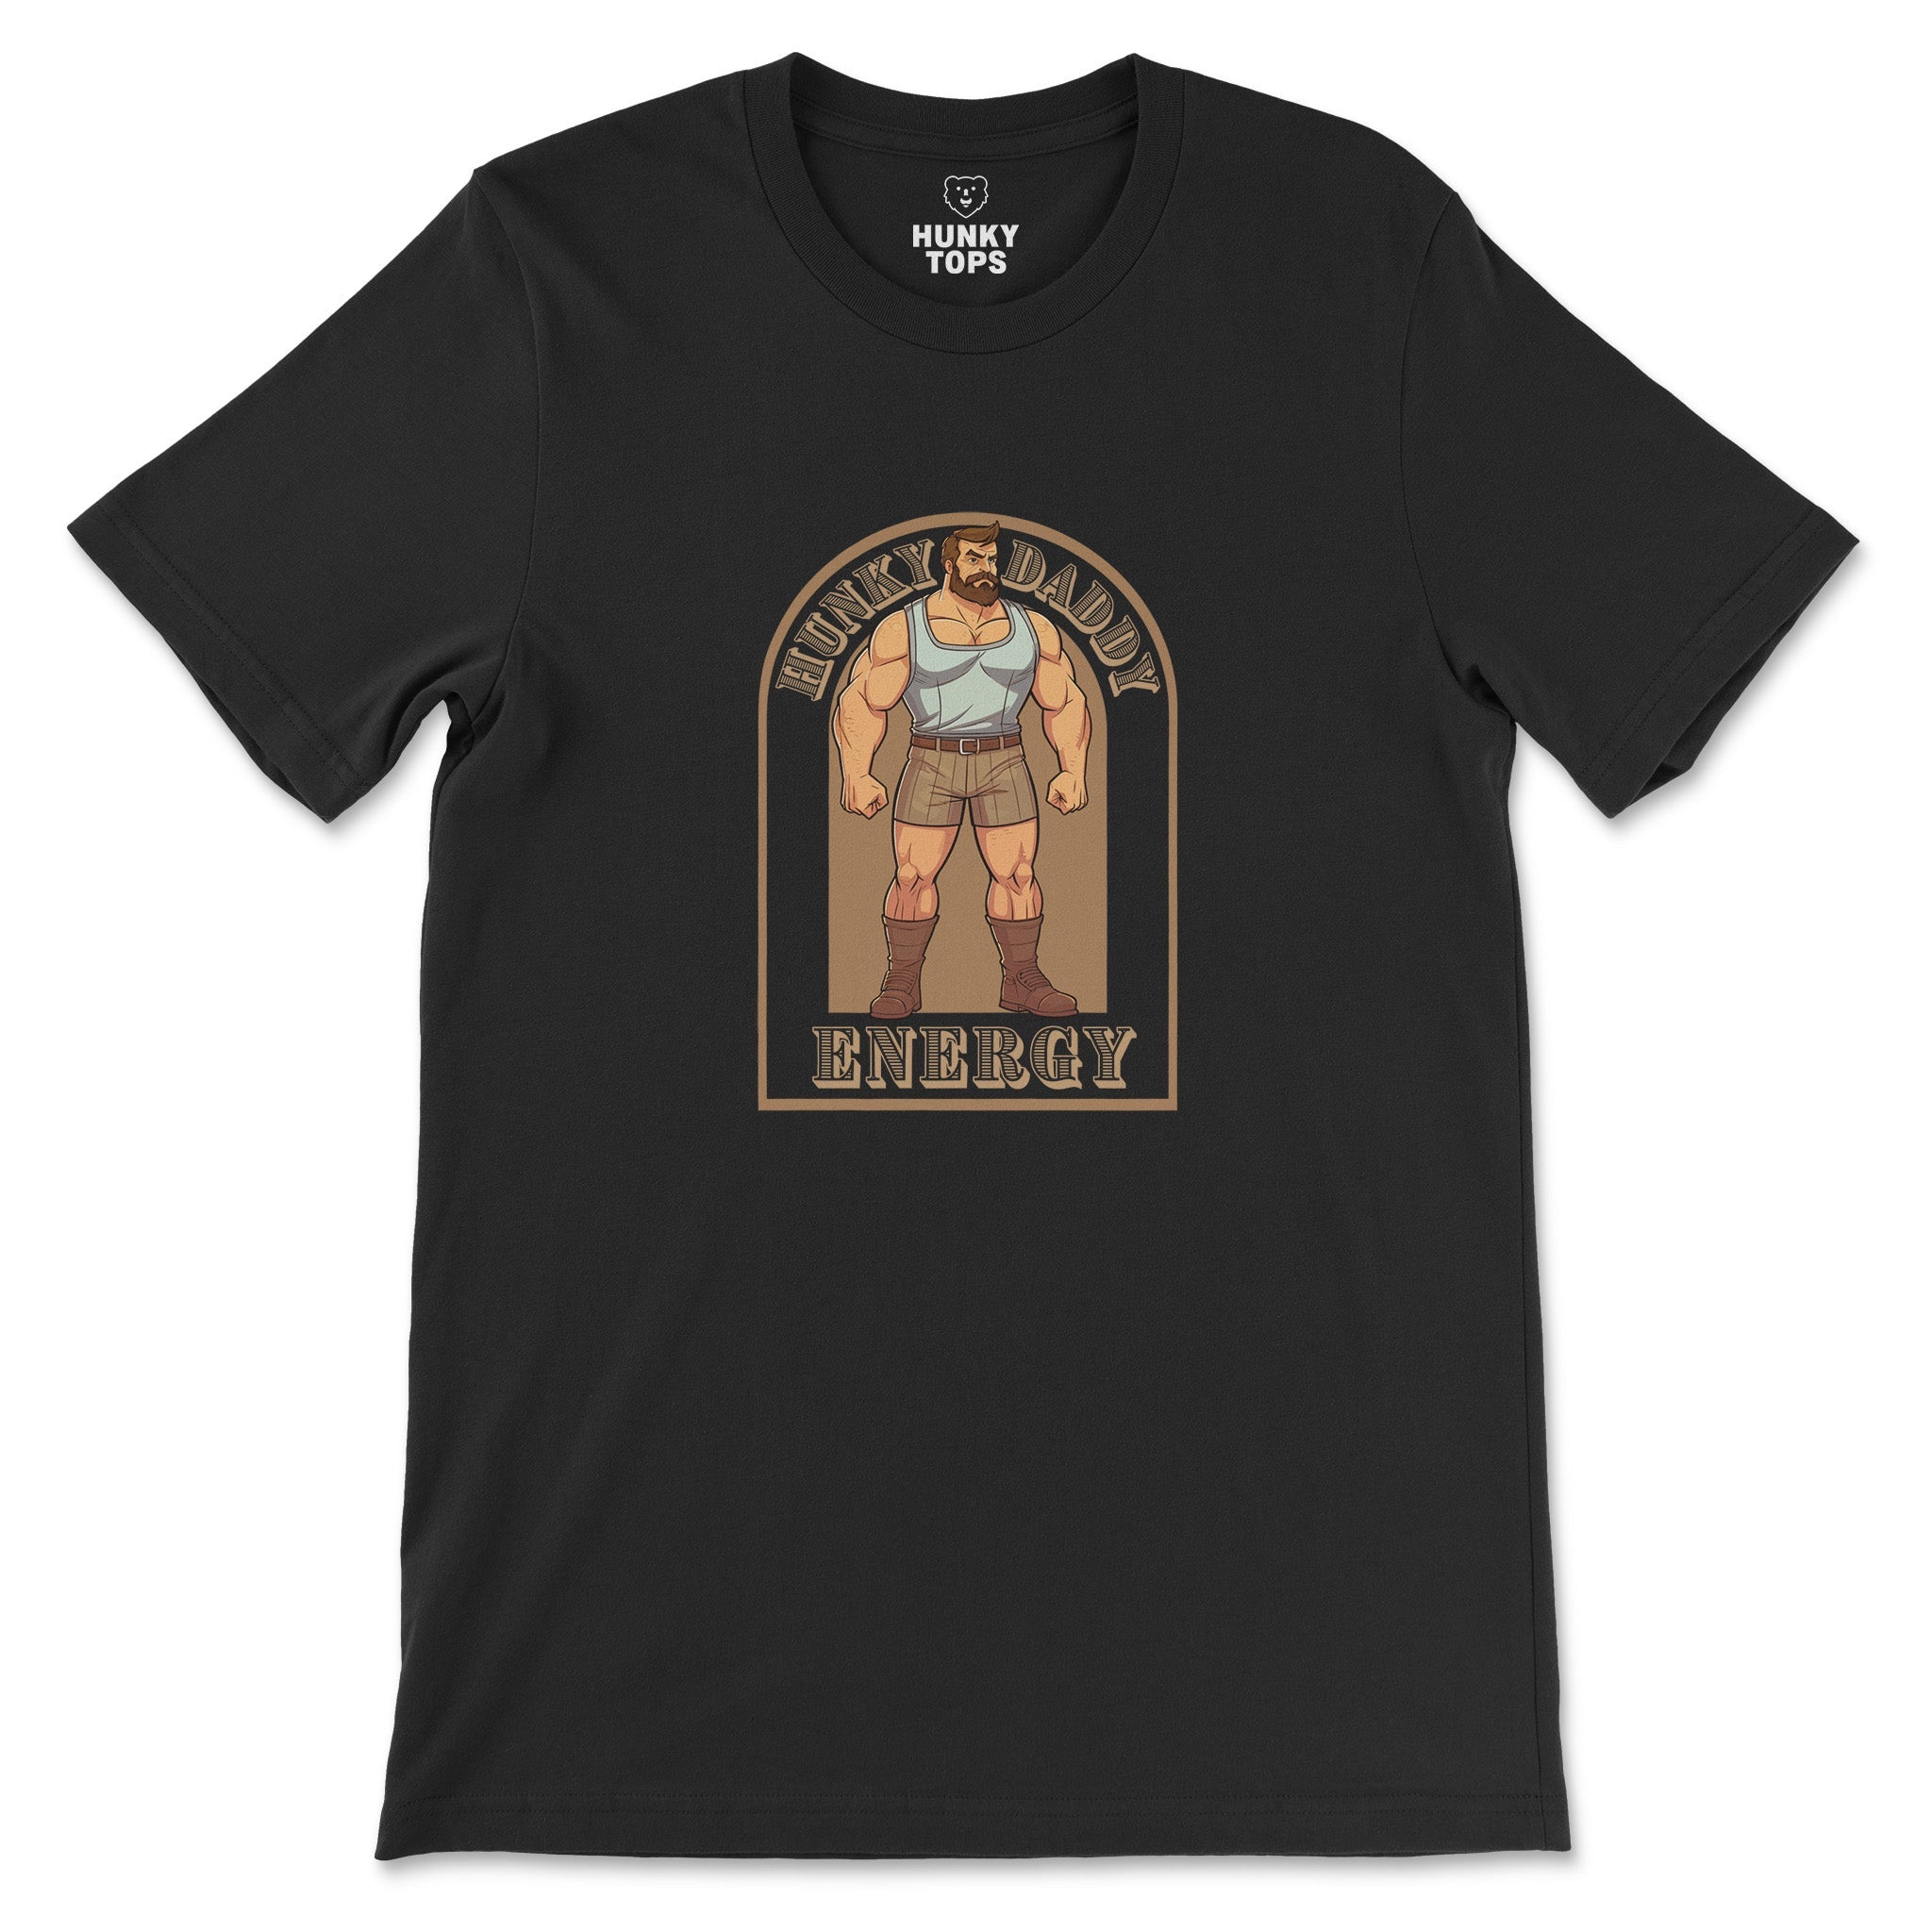 "Hunky Daddy Energy" T-Shirt - Celebrating Gay Daddy Pride - Hunky Tops